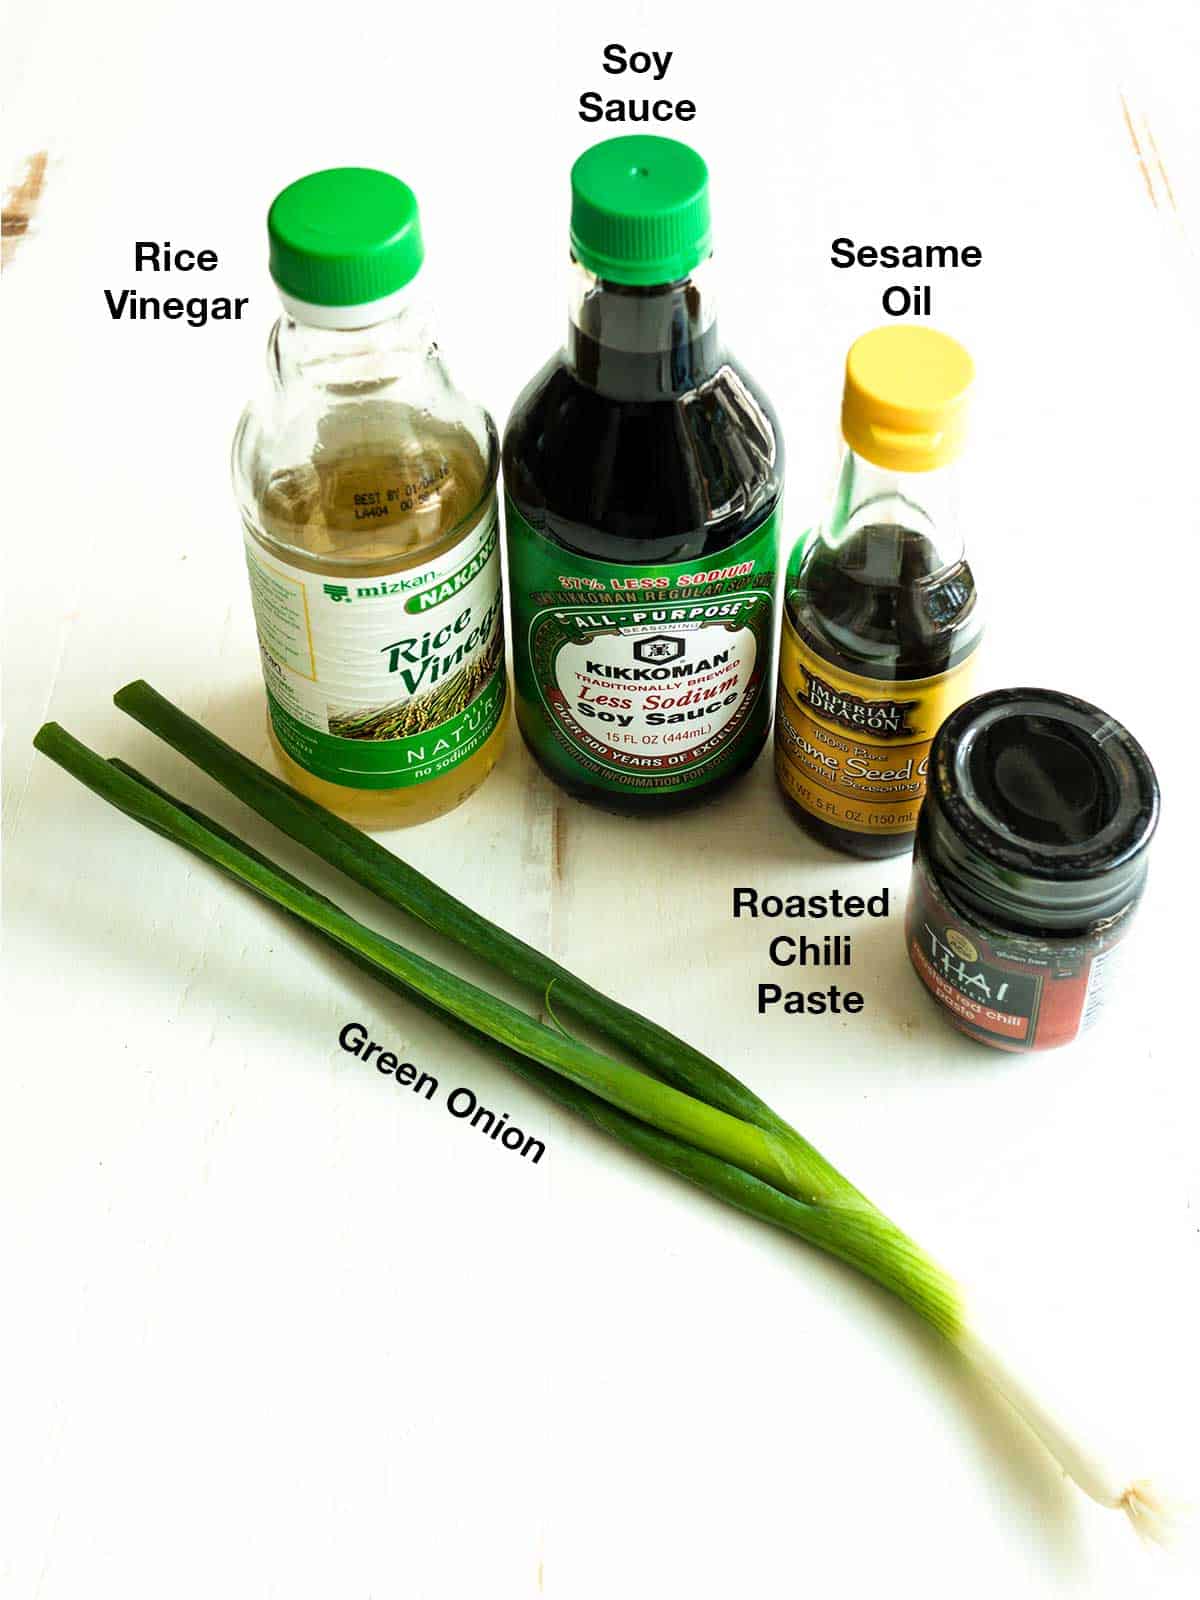 Ingredients for spicy dipping sauce.